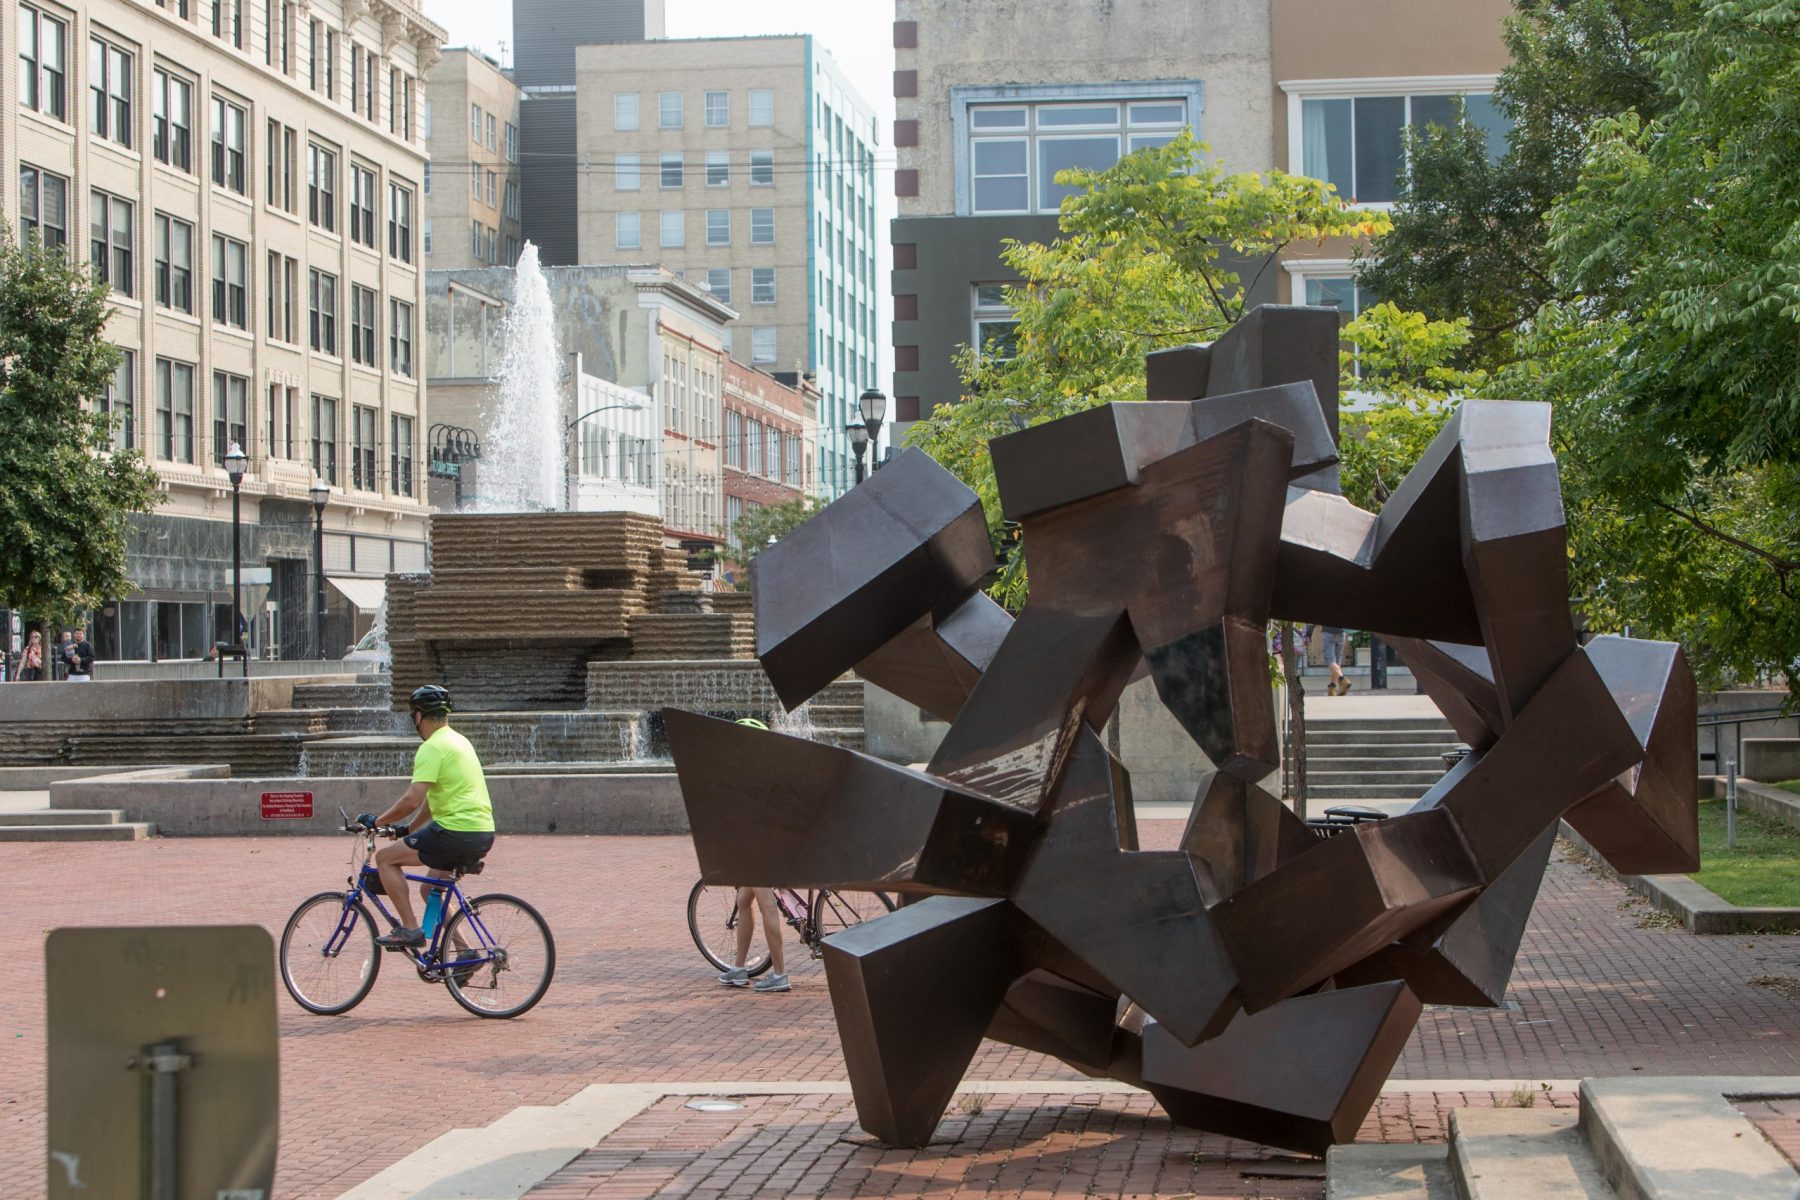 A big steel sculpture in downtown Springfield's Park Central Square called "The Tumbler" artwork art sculpture large